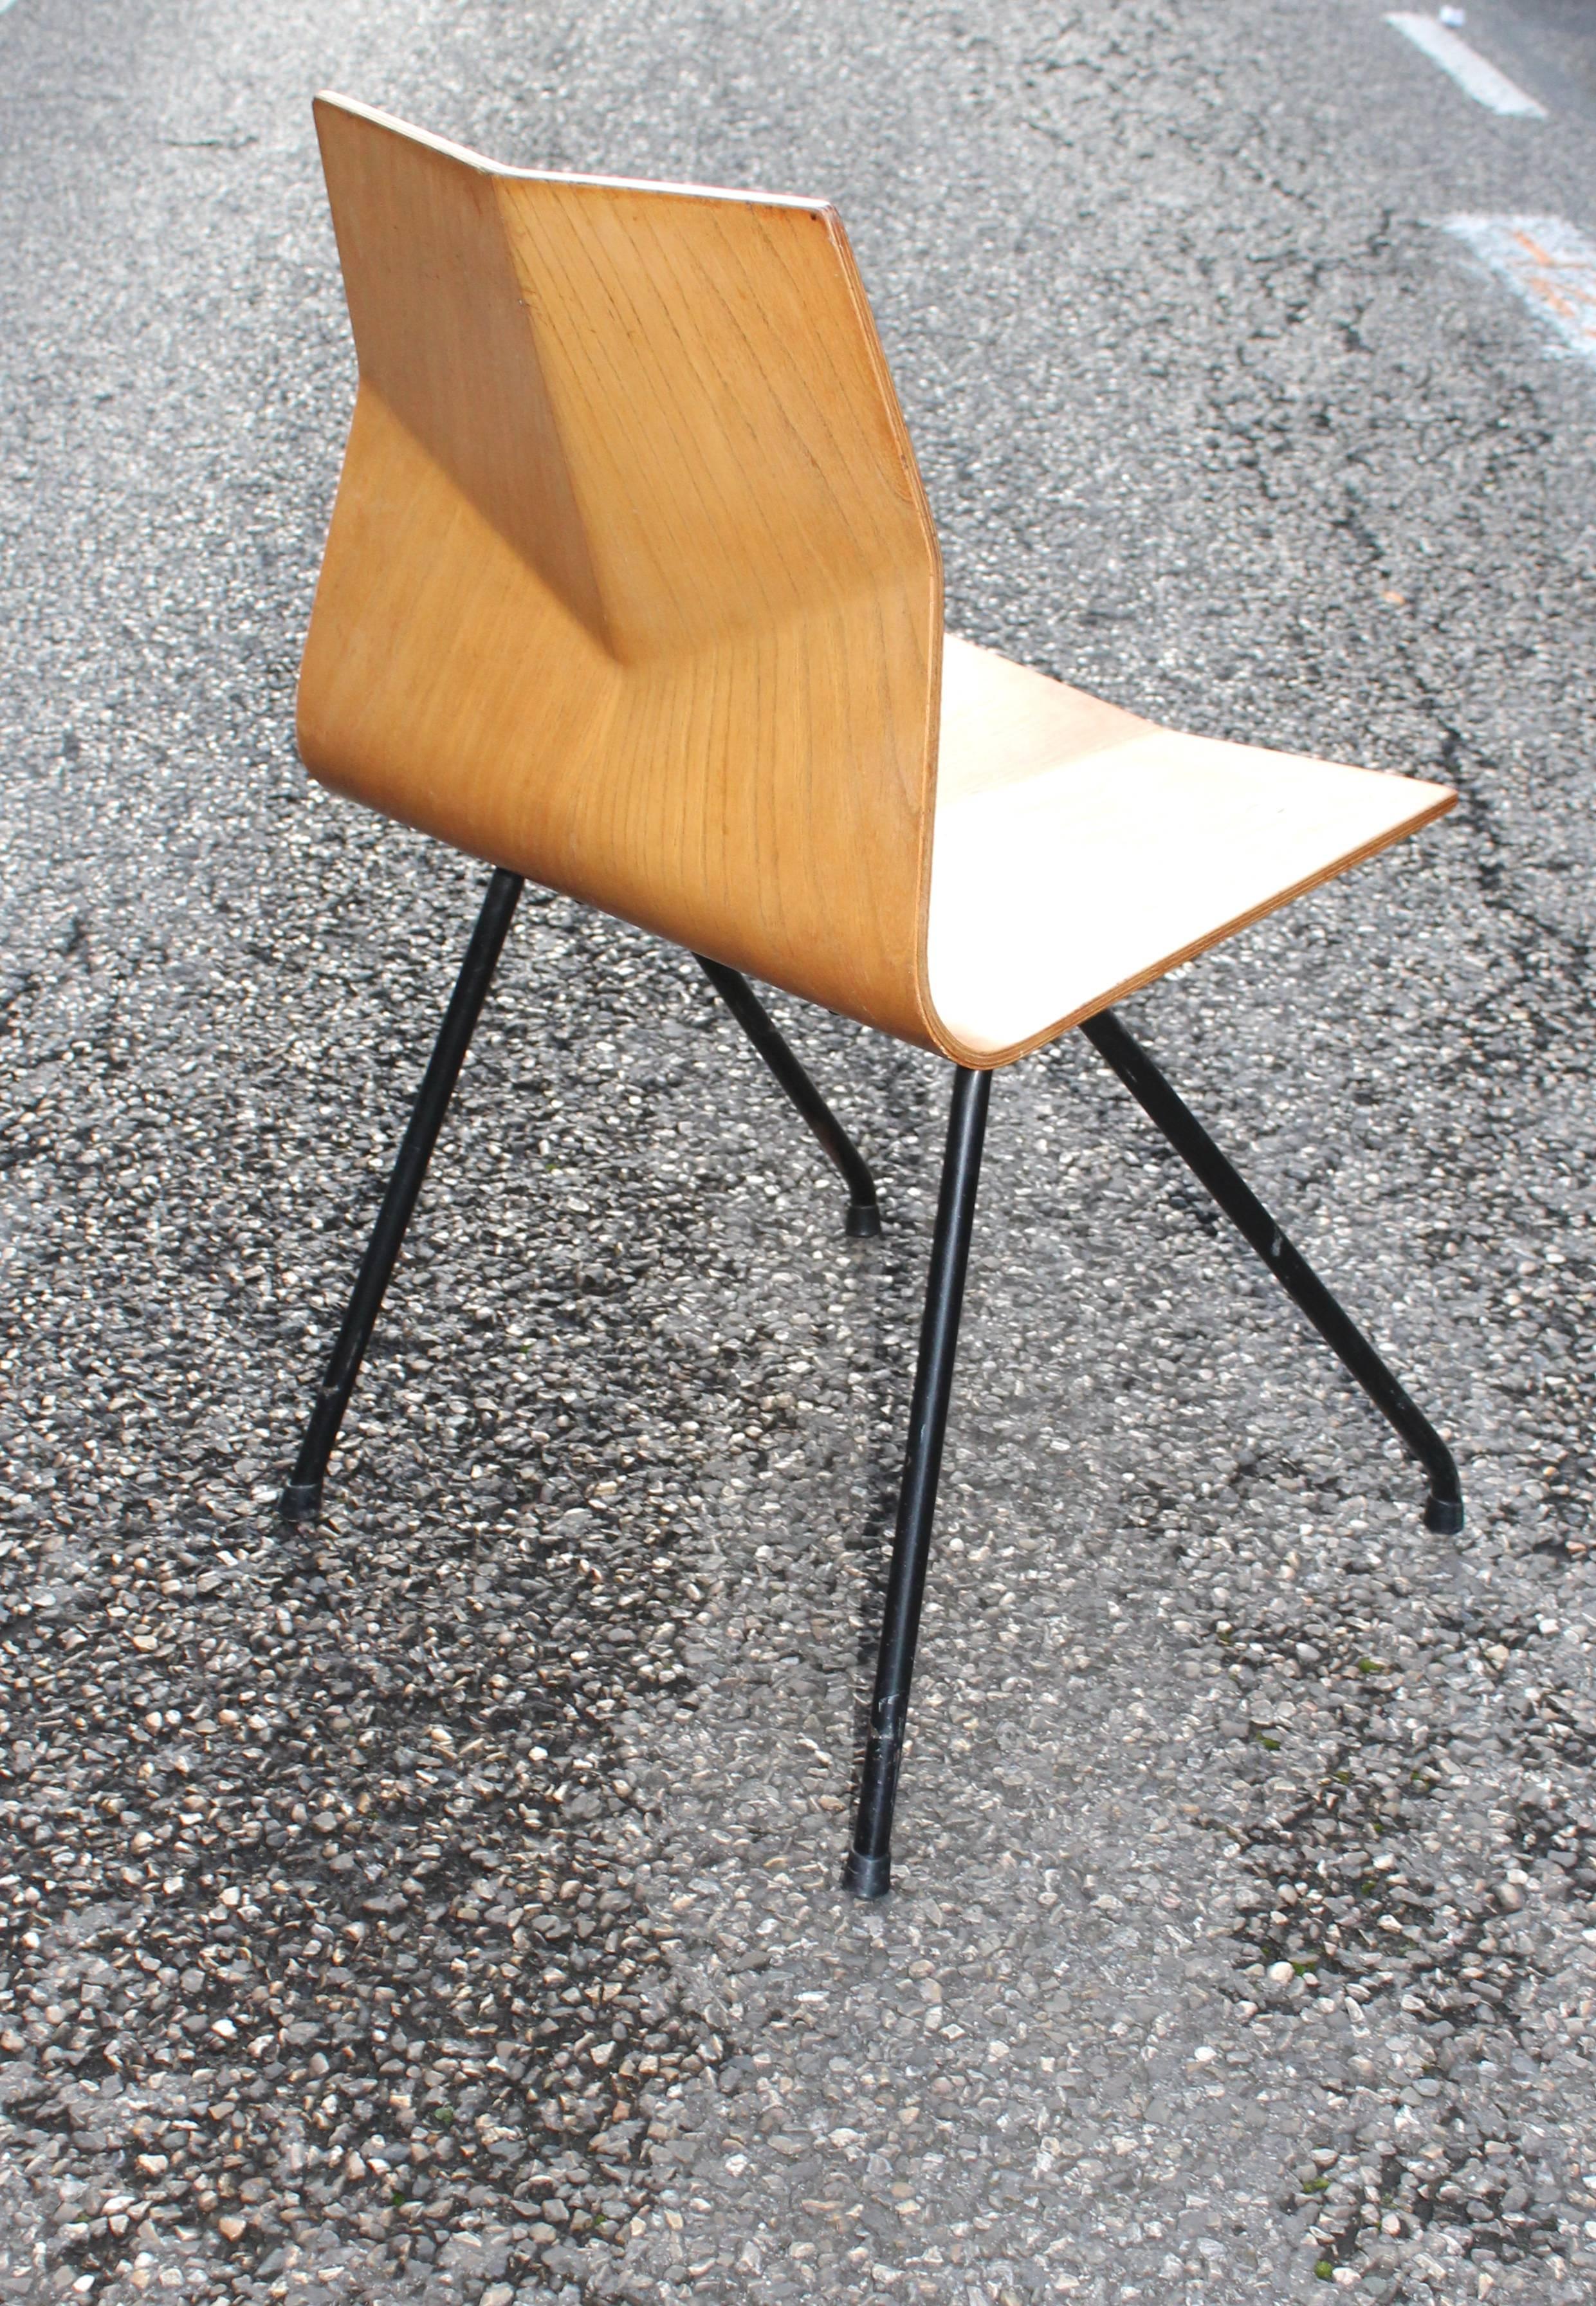 Jean René Caillette Diamant chair Steiner 1961.
A plywood mahogany veneered chair with black enameled tubular metal feet.
Dimensions
31 in.Hx18 in.Wx16 in.D
79 cmHx46 cmWx41 cmD.